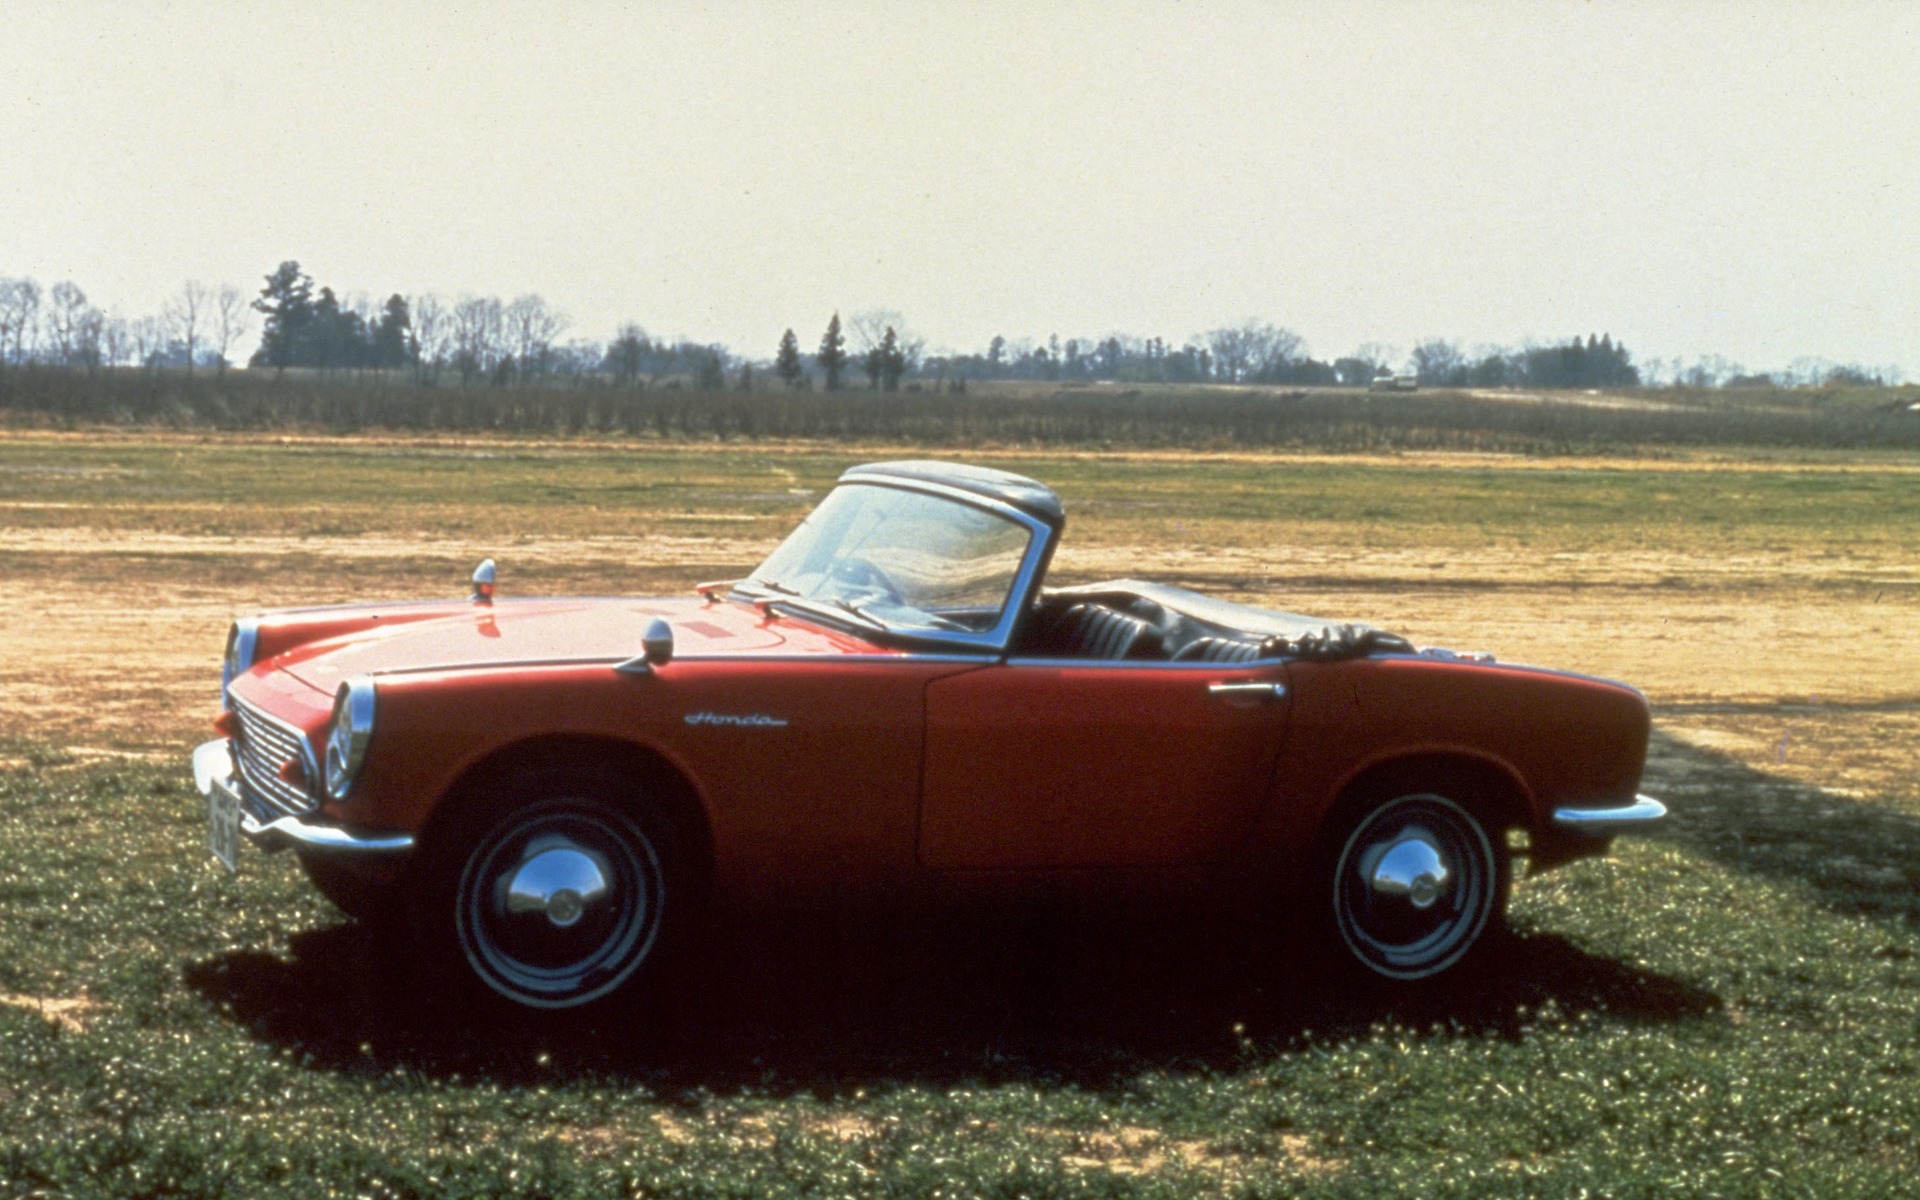 Honda S500 / S600 / S800: this is the second car ever produced by Honda. 